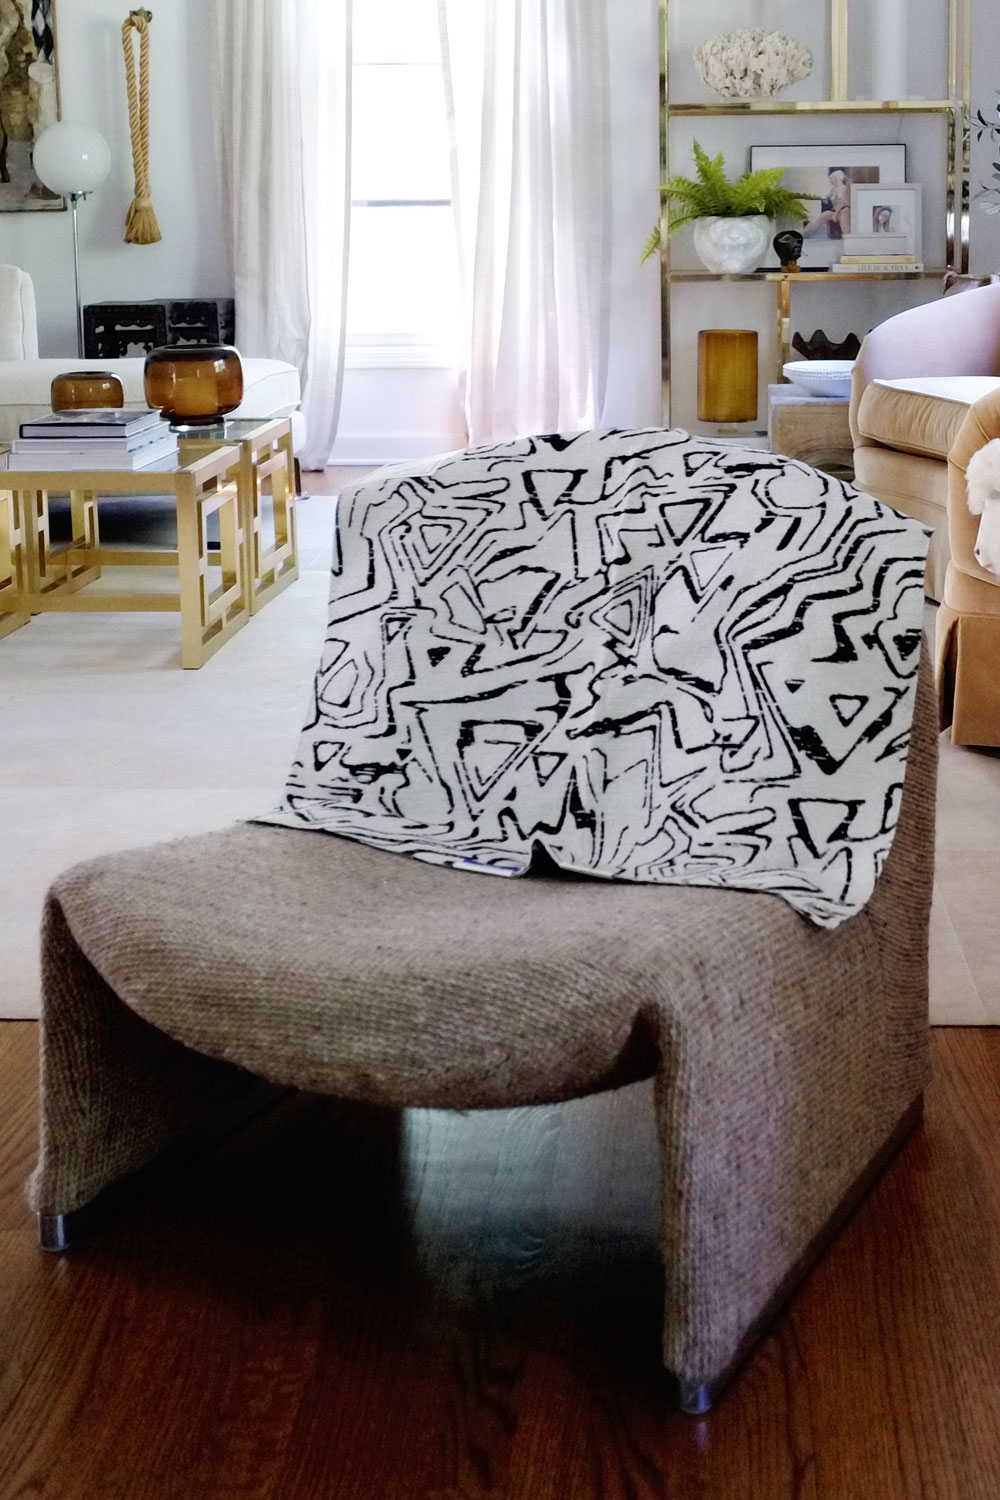 How To Choose The Best Upholstery Fabric - Vintage Alky Chair